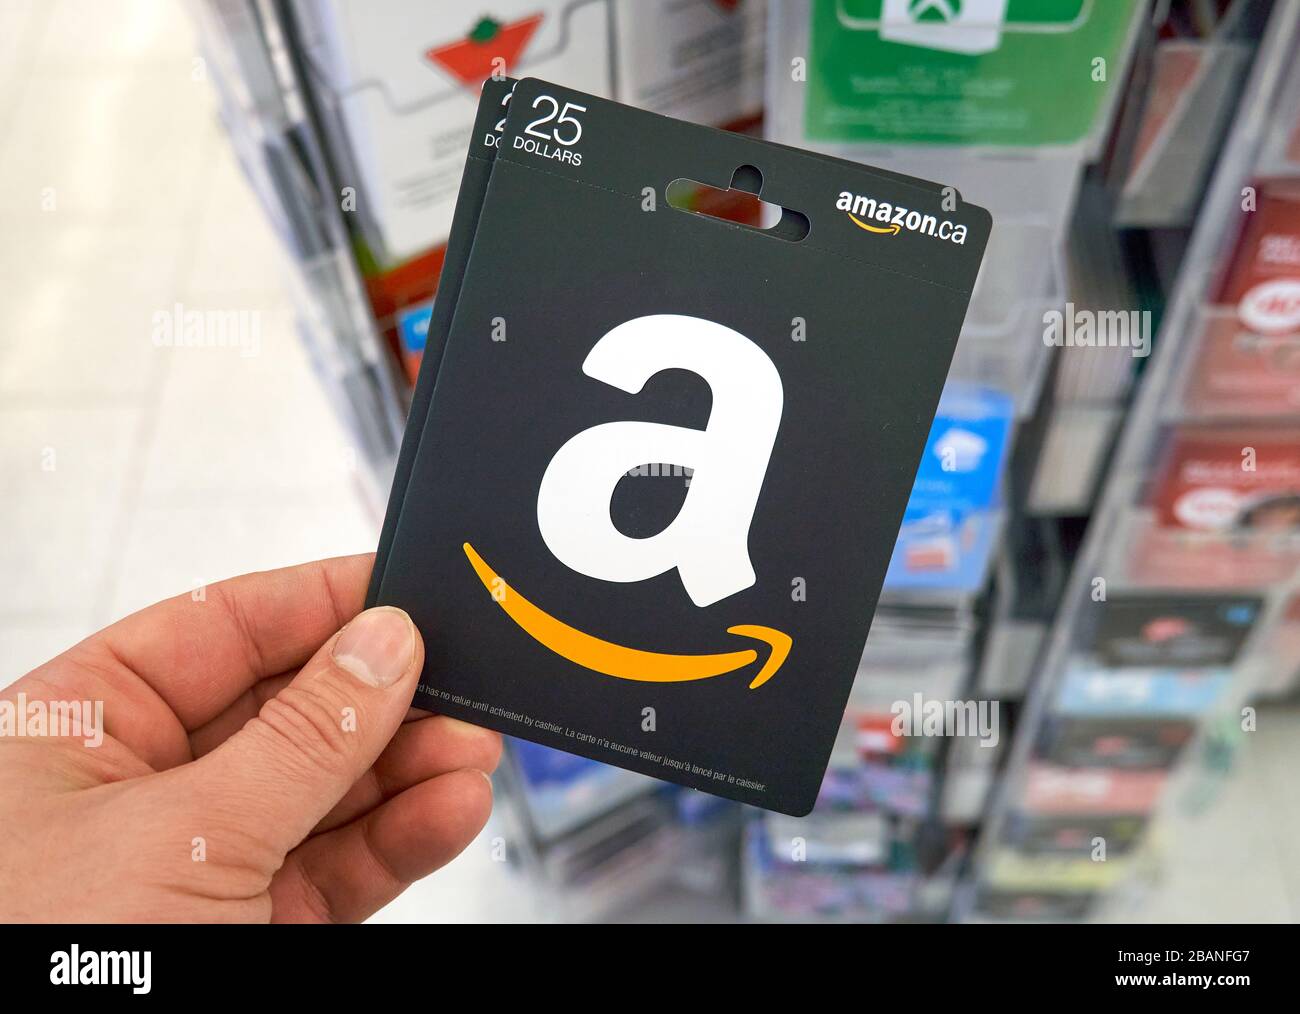 Amazon Card High Resolution Stock Photography and Images - Alamy